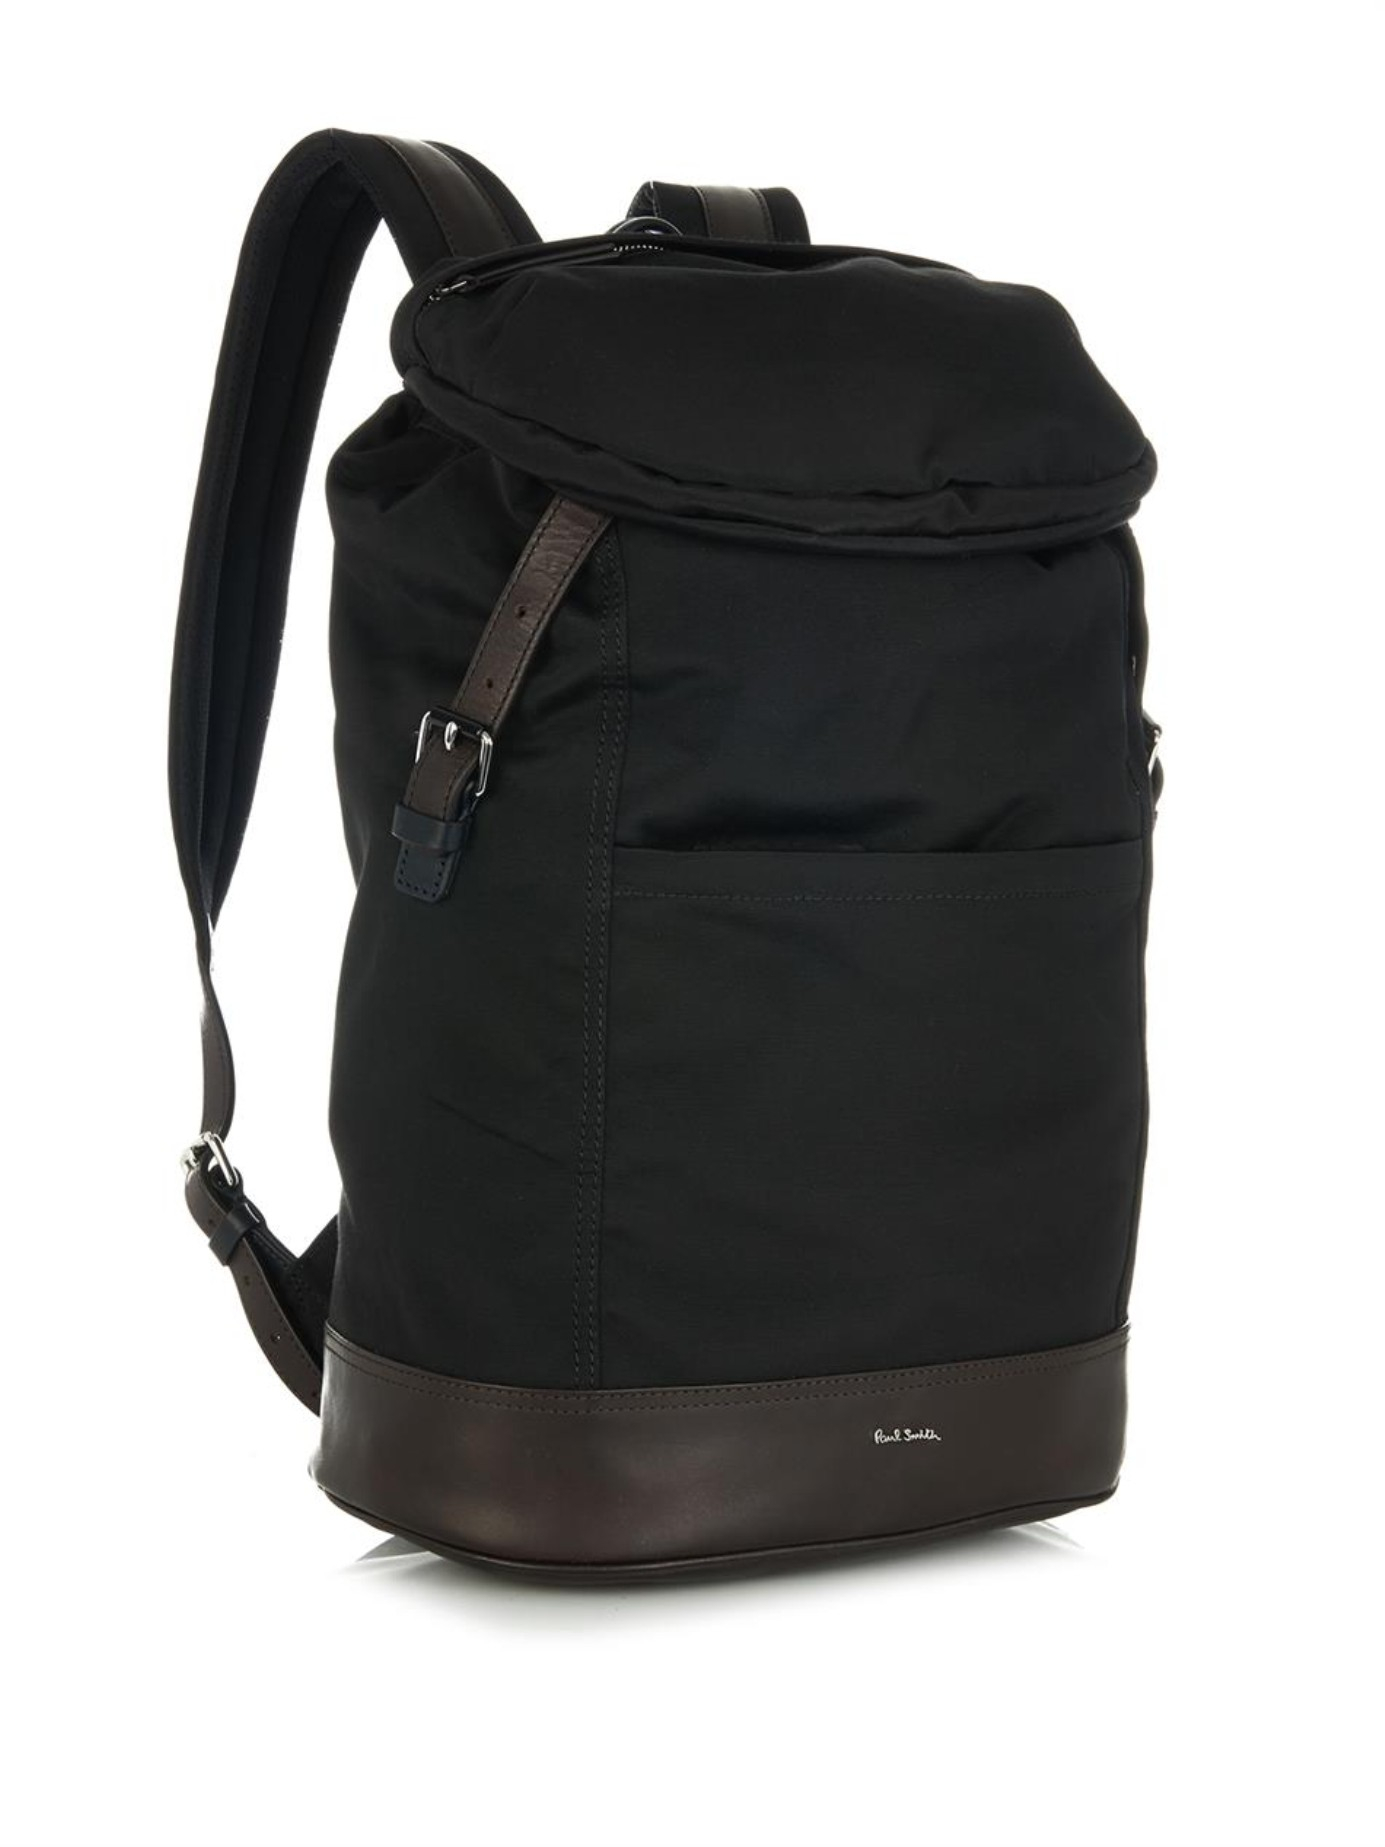 Paul smith Grosgrain And Leather Backpack in Black for Men | Lyst